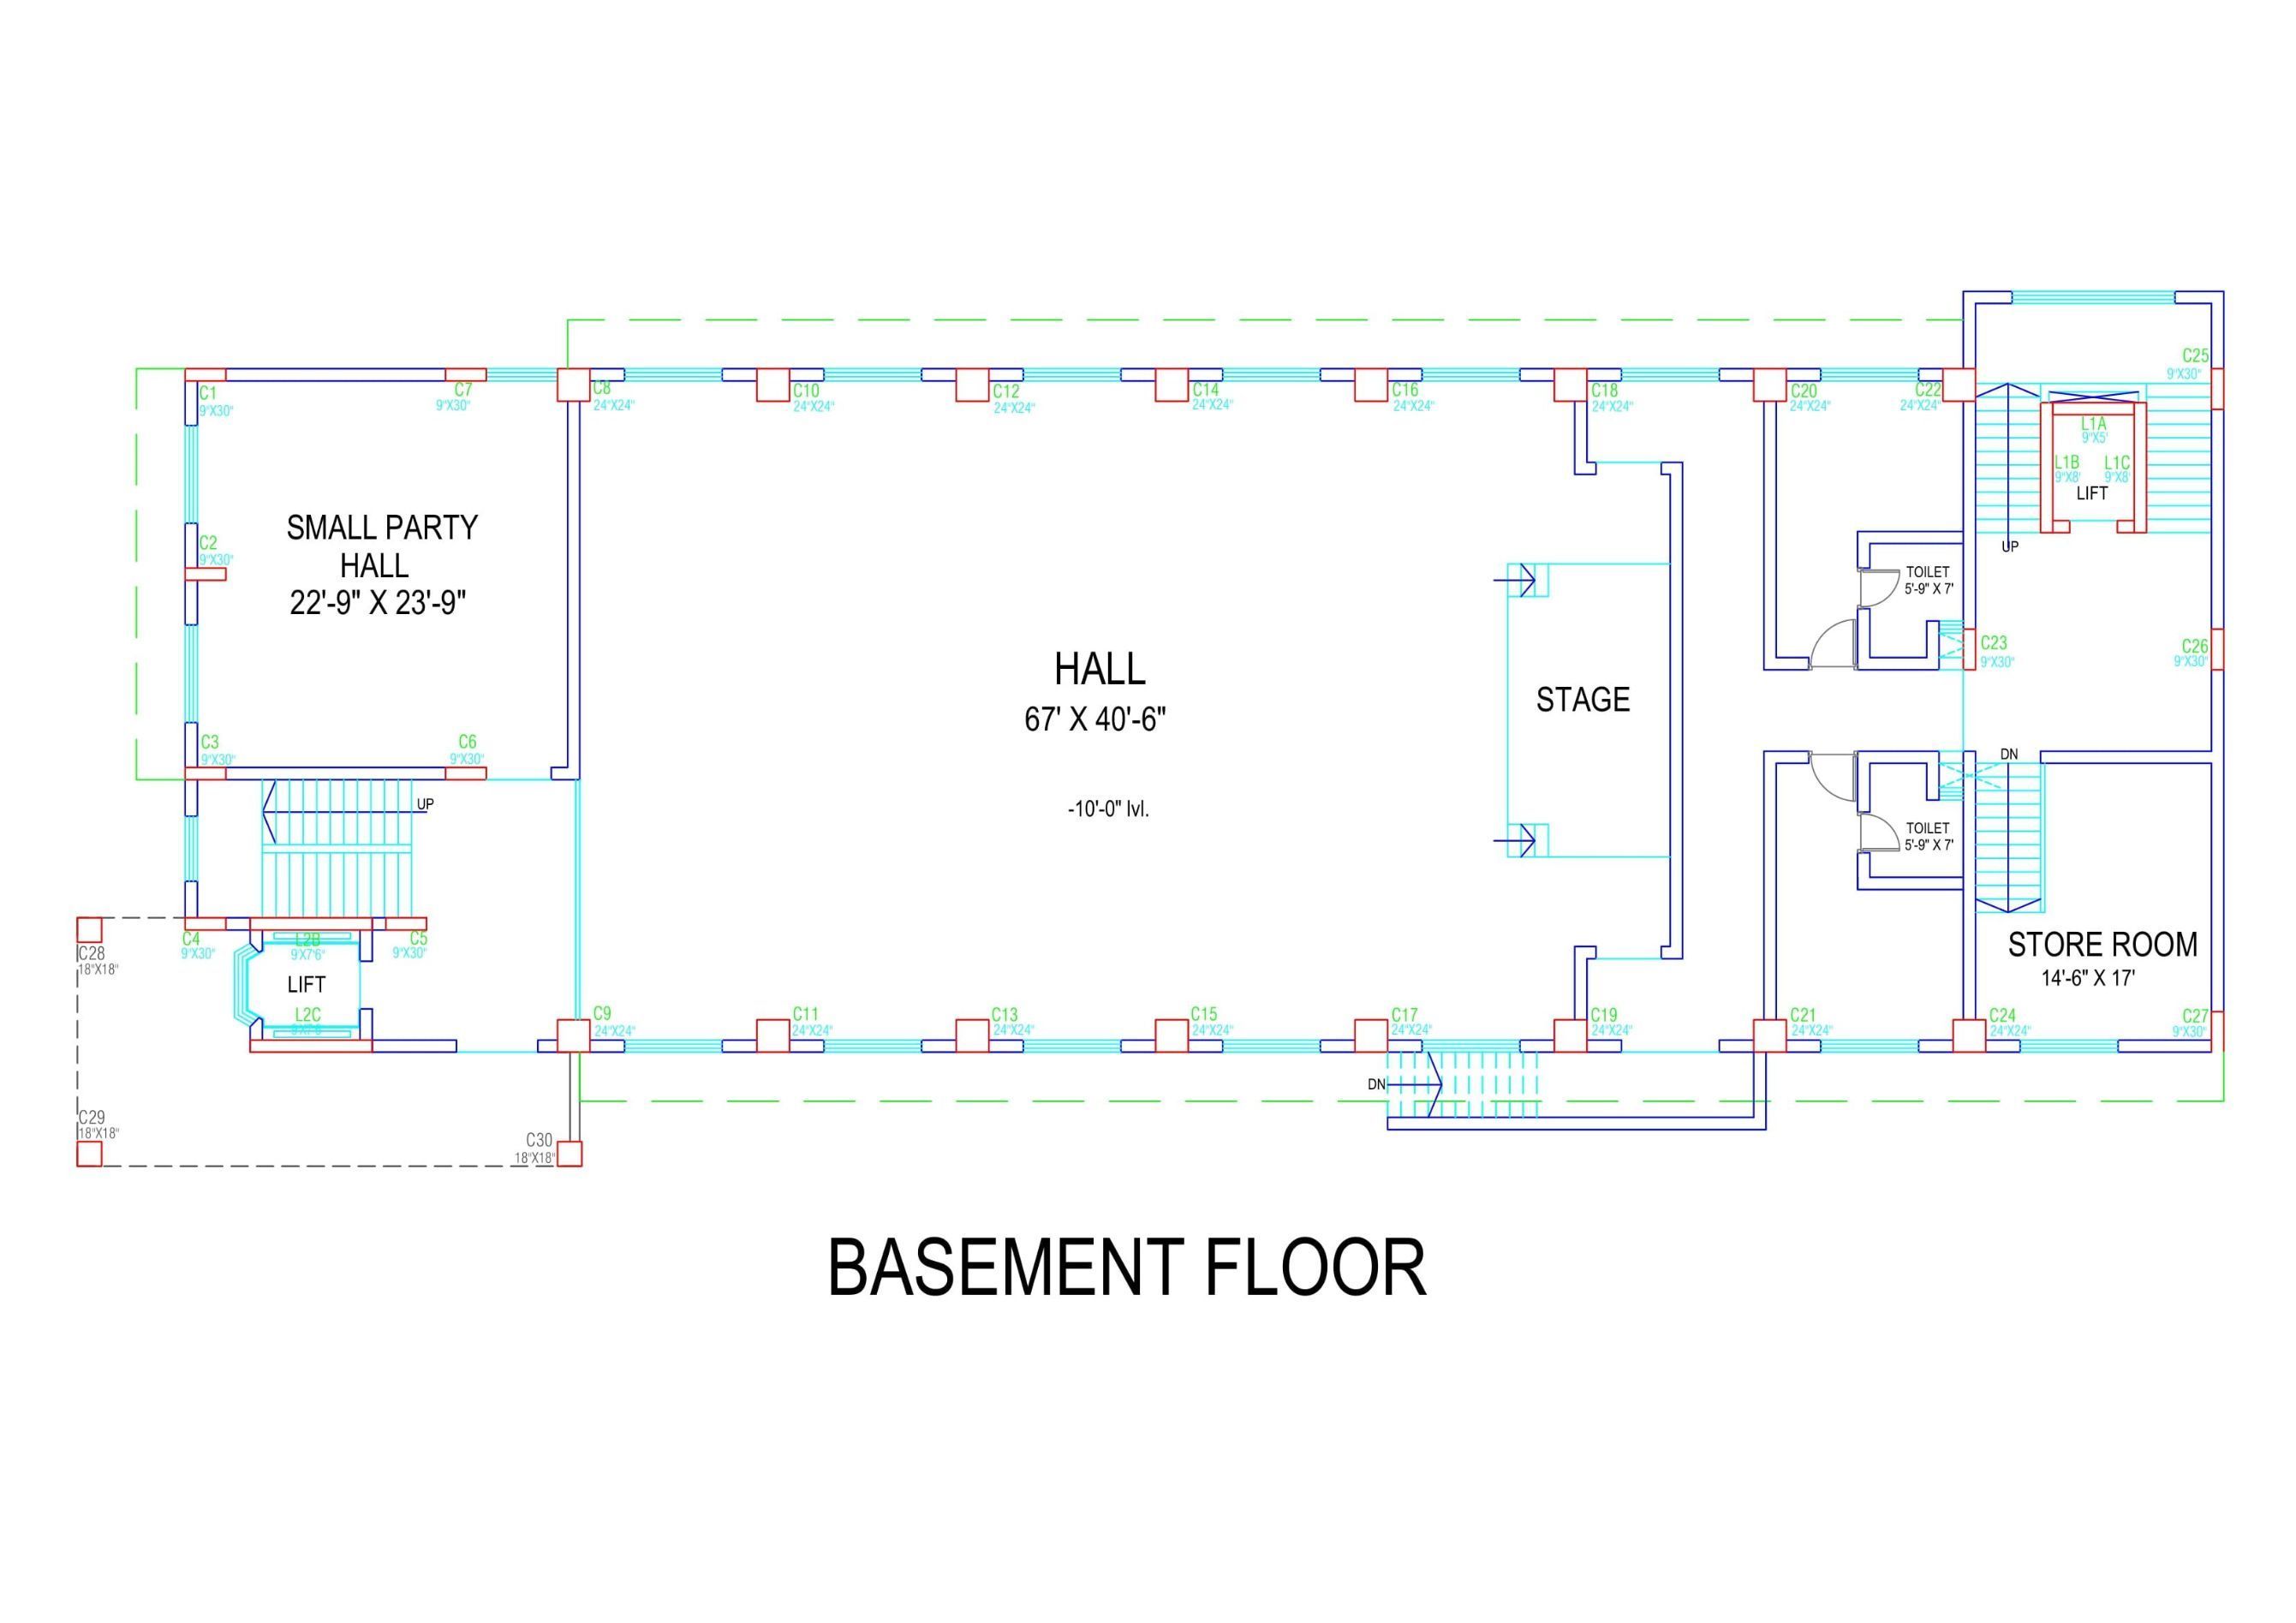 hotel-basement-floor-plan-with-dimention